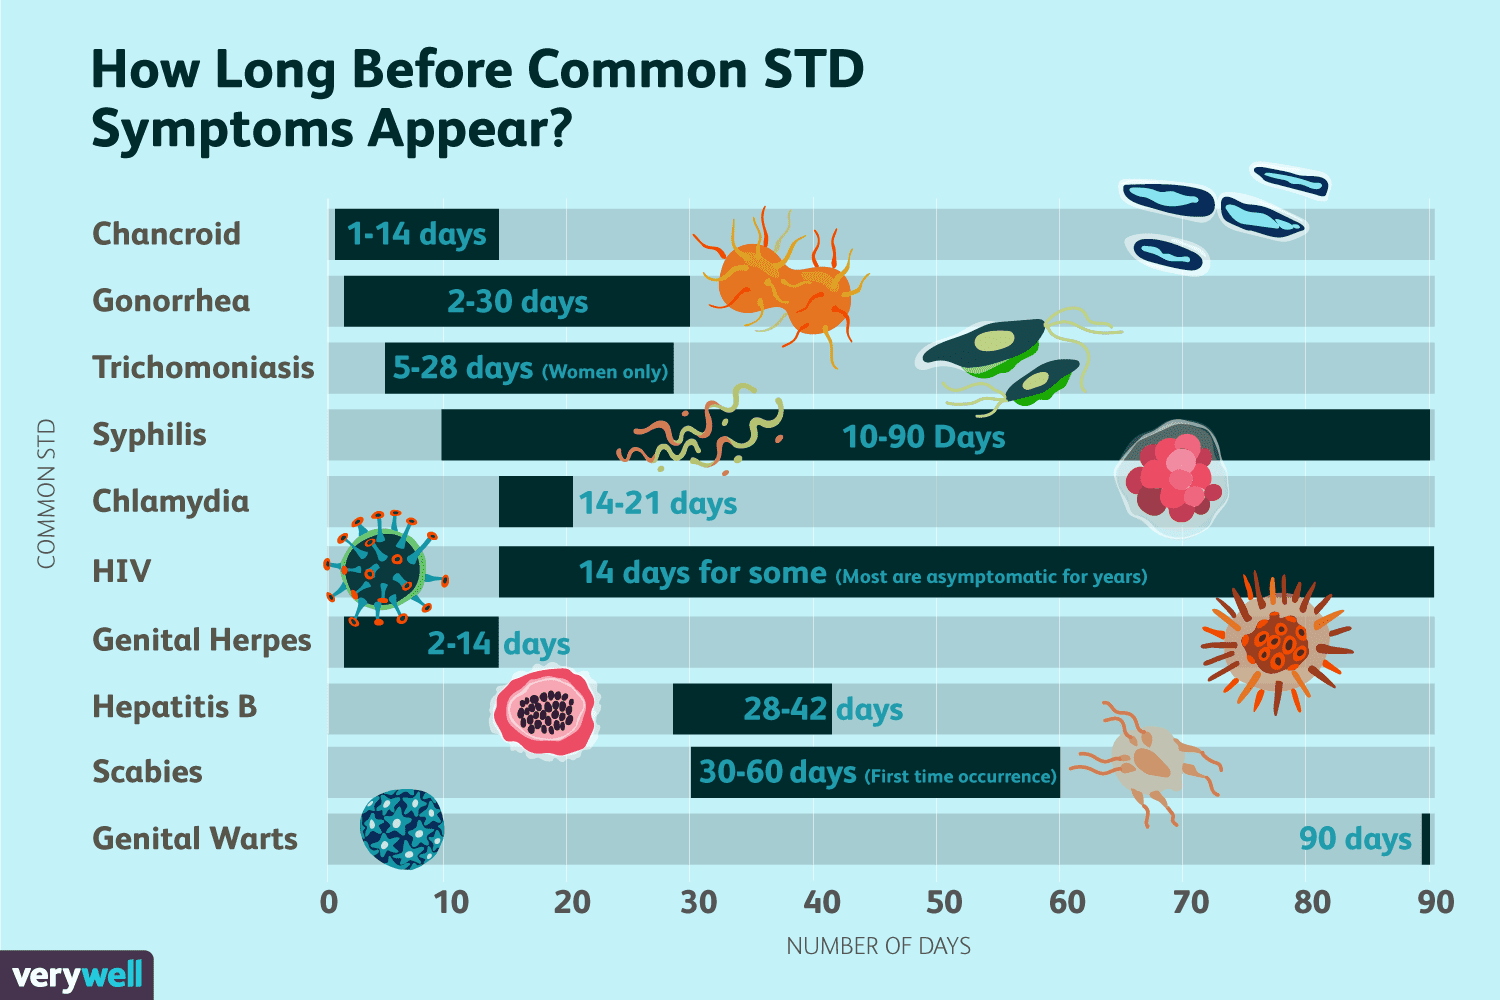 The Incubation Period of Common STDs